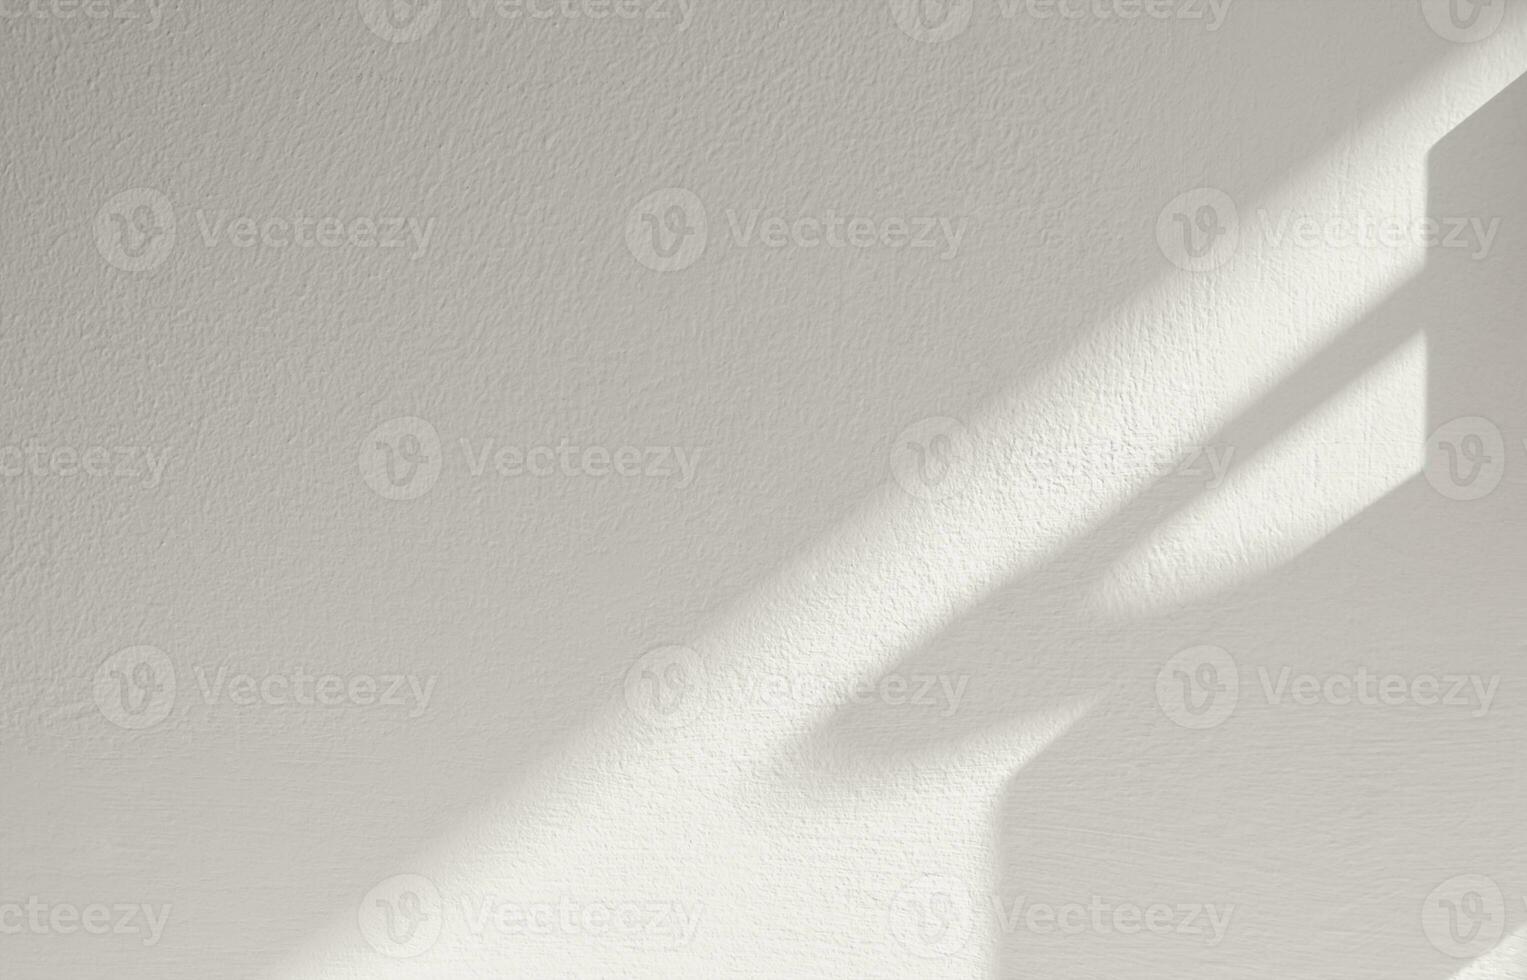 Shadow diagonal on grey cement wall texture. Sunlight overlay white plaster paint on concrete floor,Abstract Light effect for Monochrome photo, mock up, poster, wall art, design presentation photo